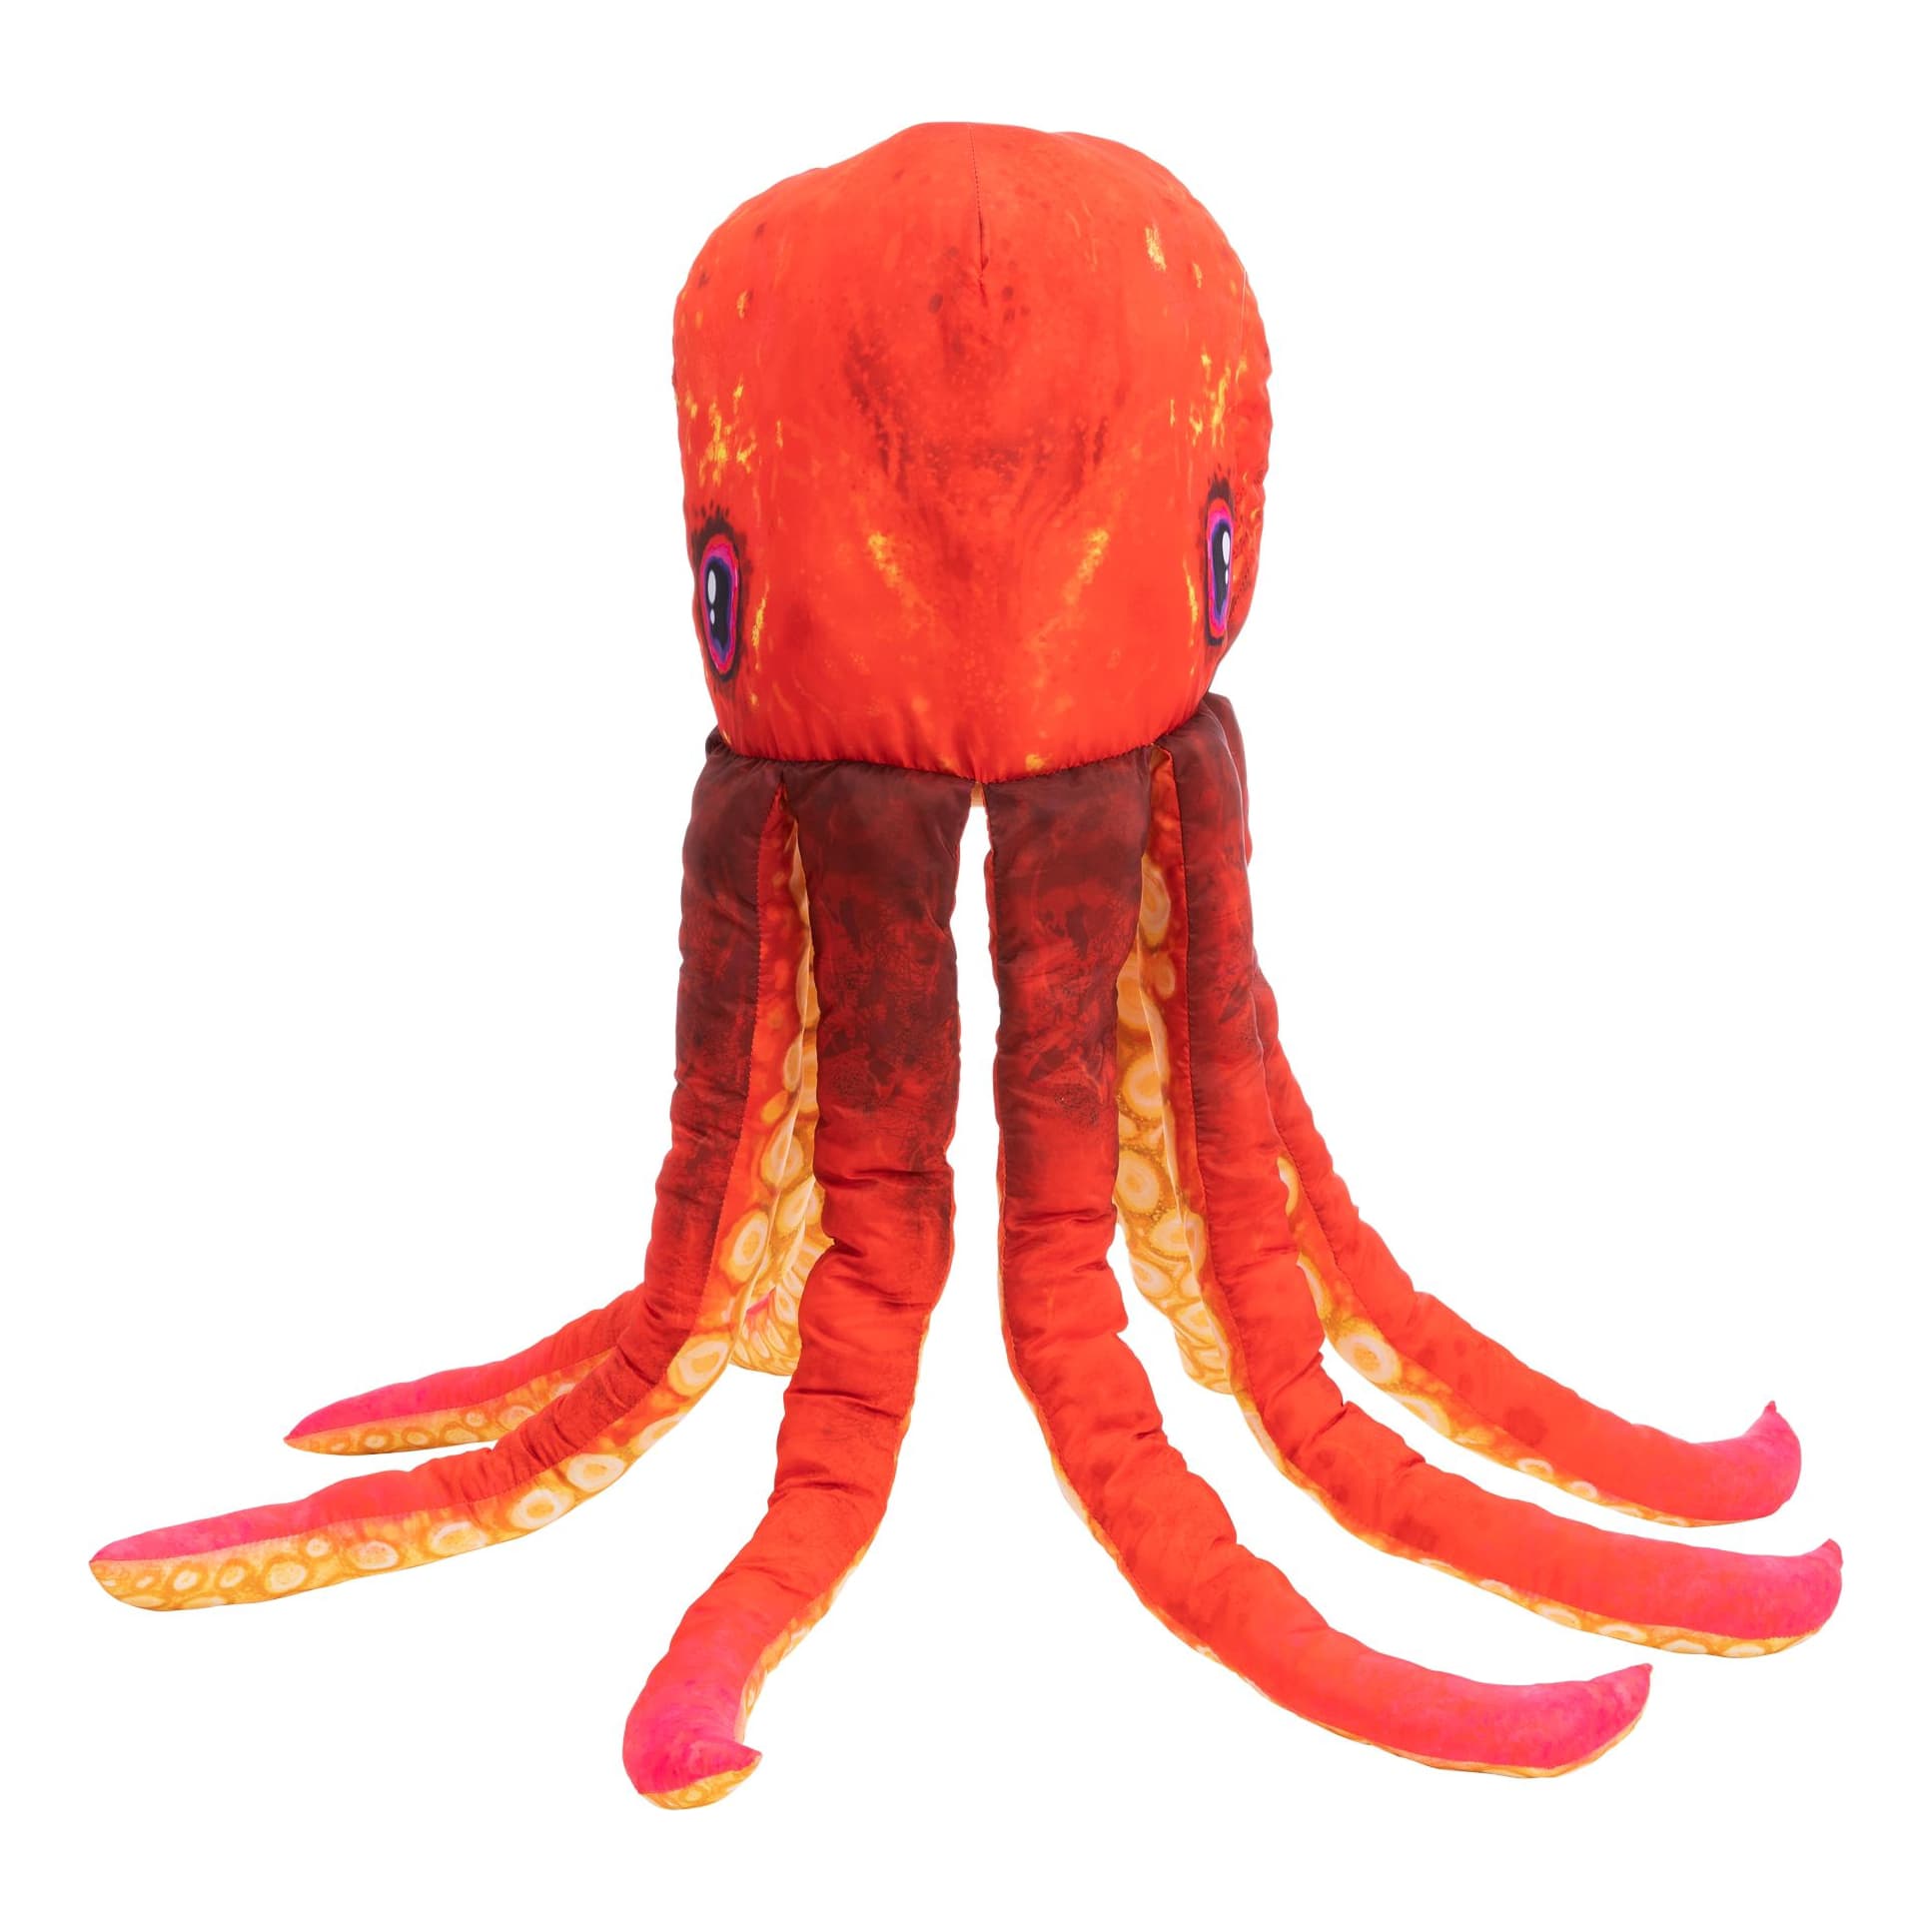 Bass Pro Shops® Giant Octopus Stuffed Toy for Kids